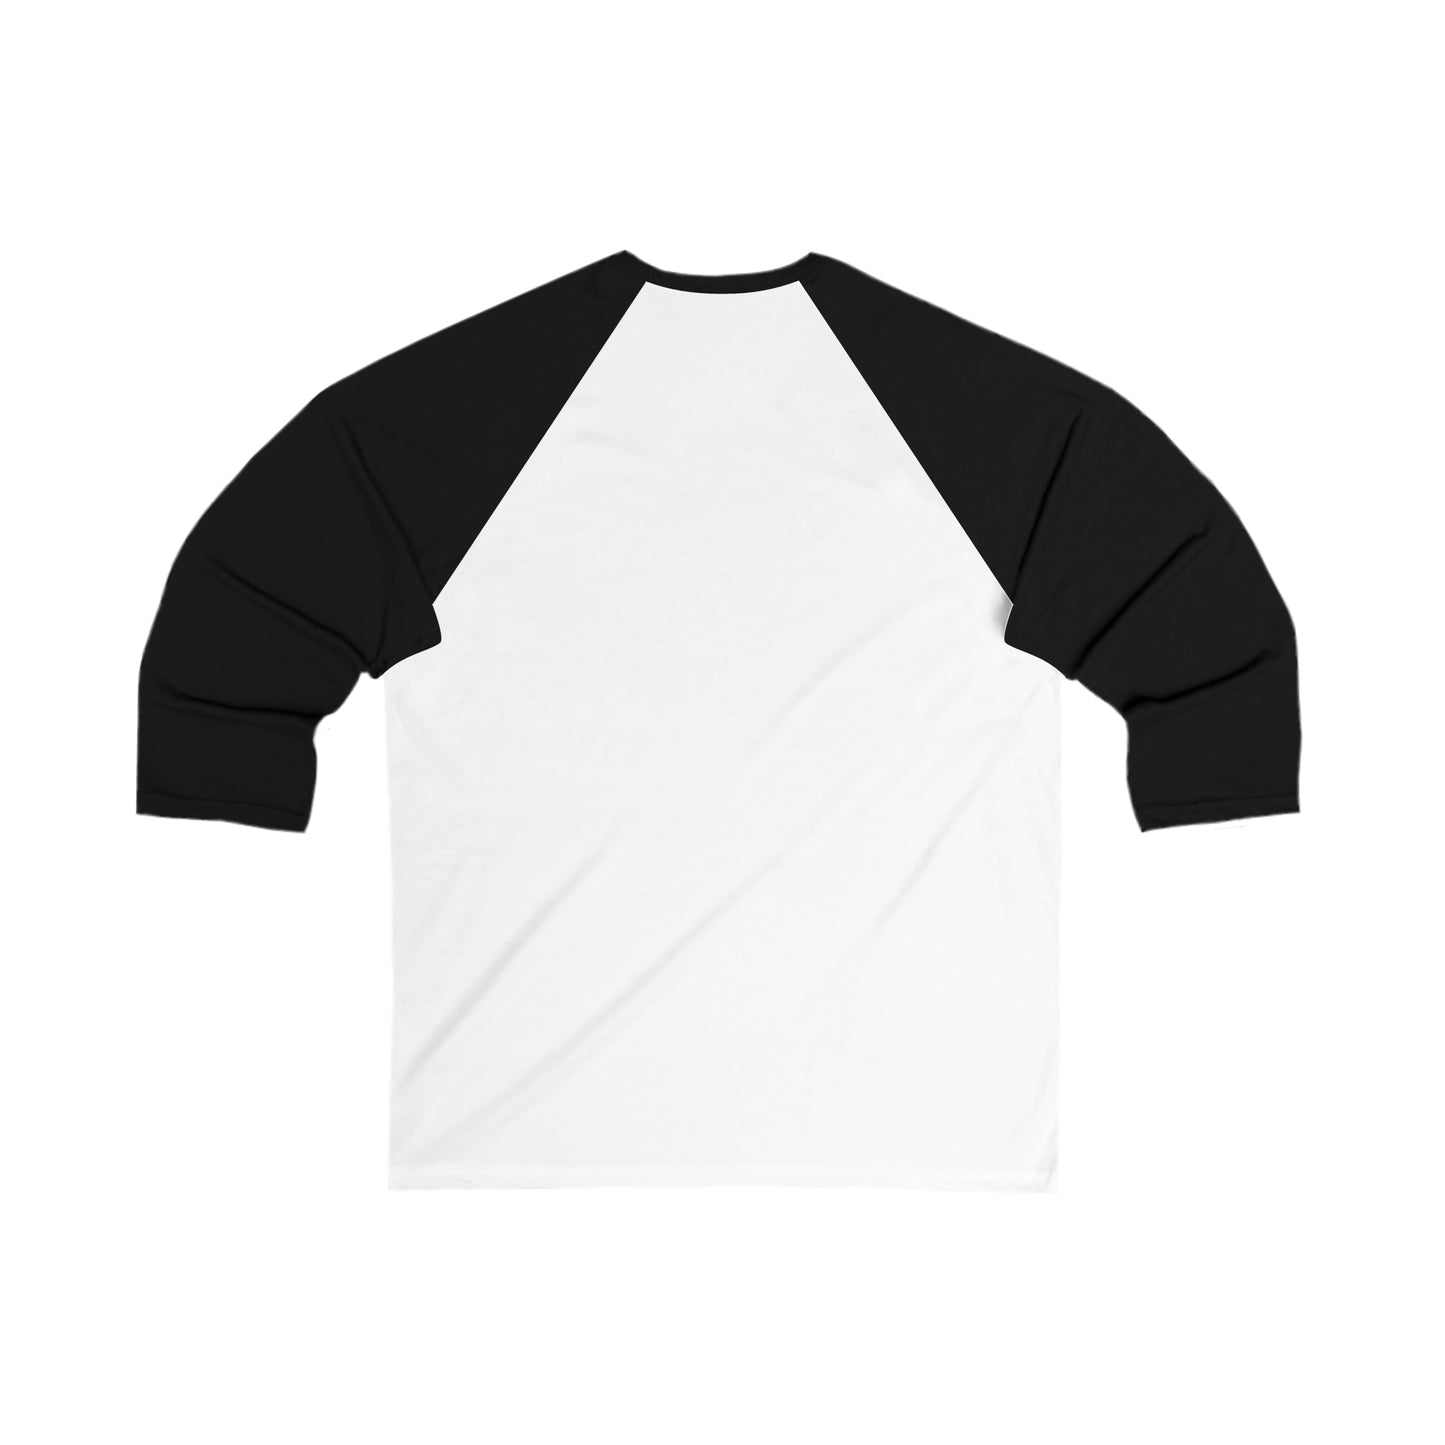 rooted together classic 3/4 sleeve baseball tee